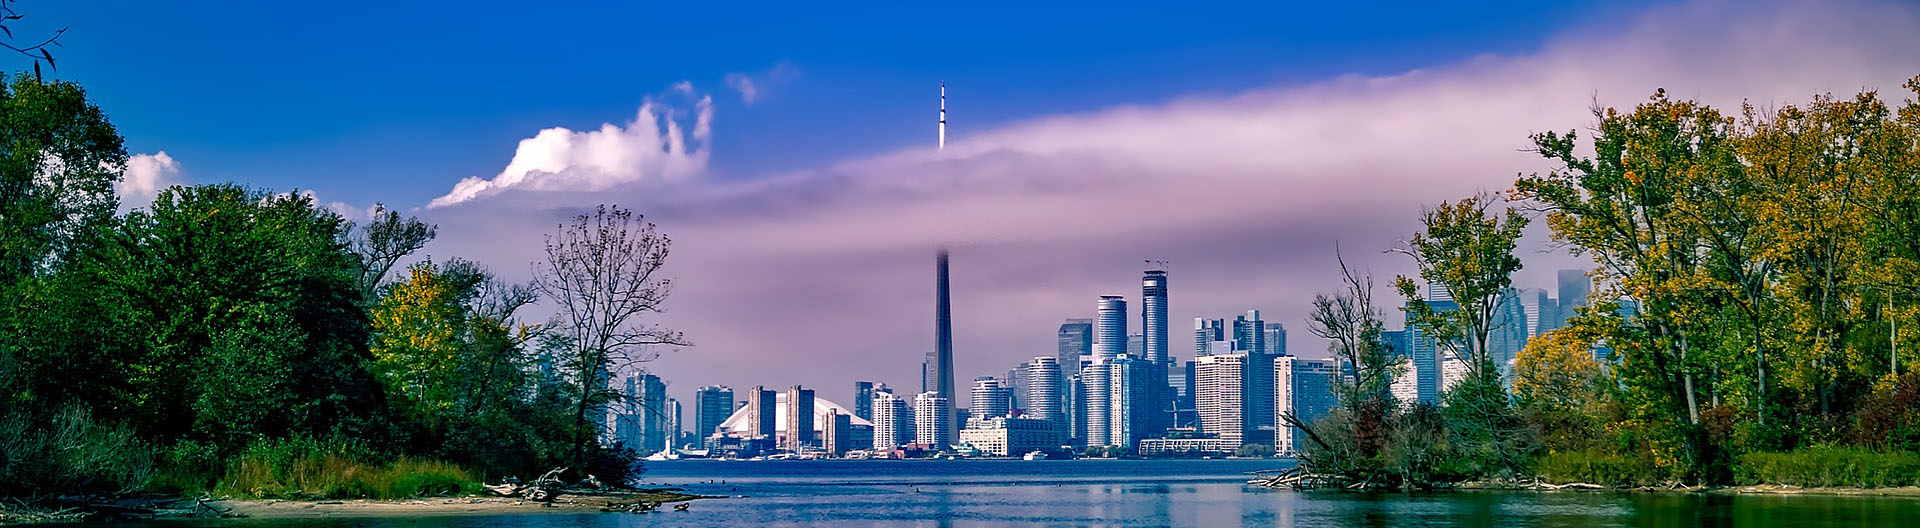 A landscape photo of downtown Toronto, with the CN Tower partially covered by a large pink cloud